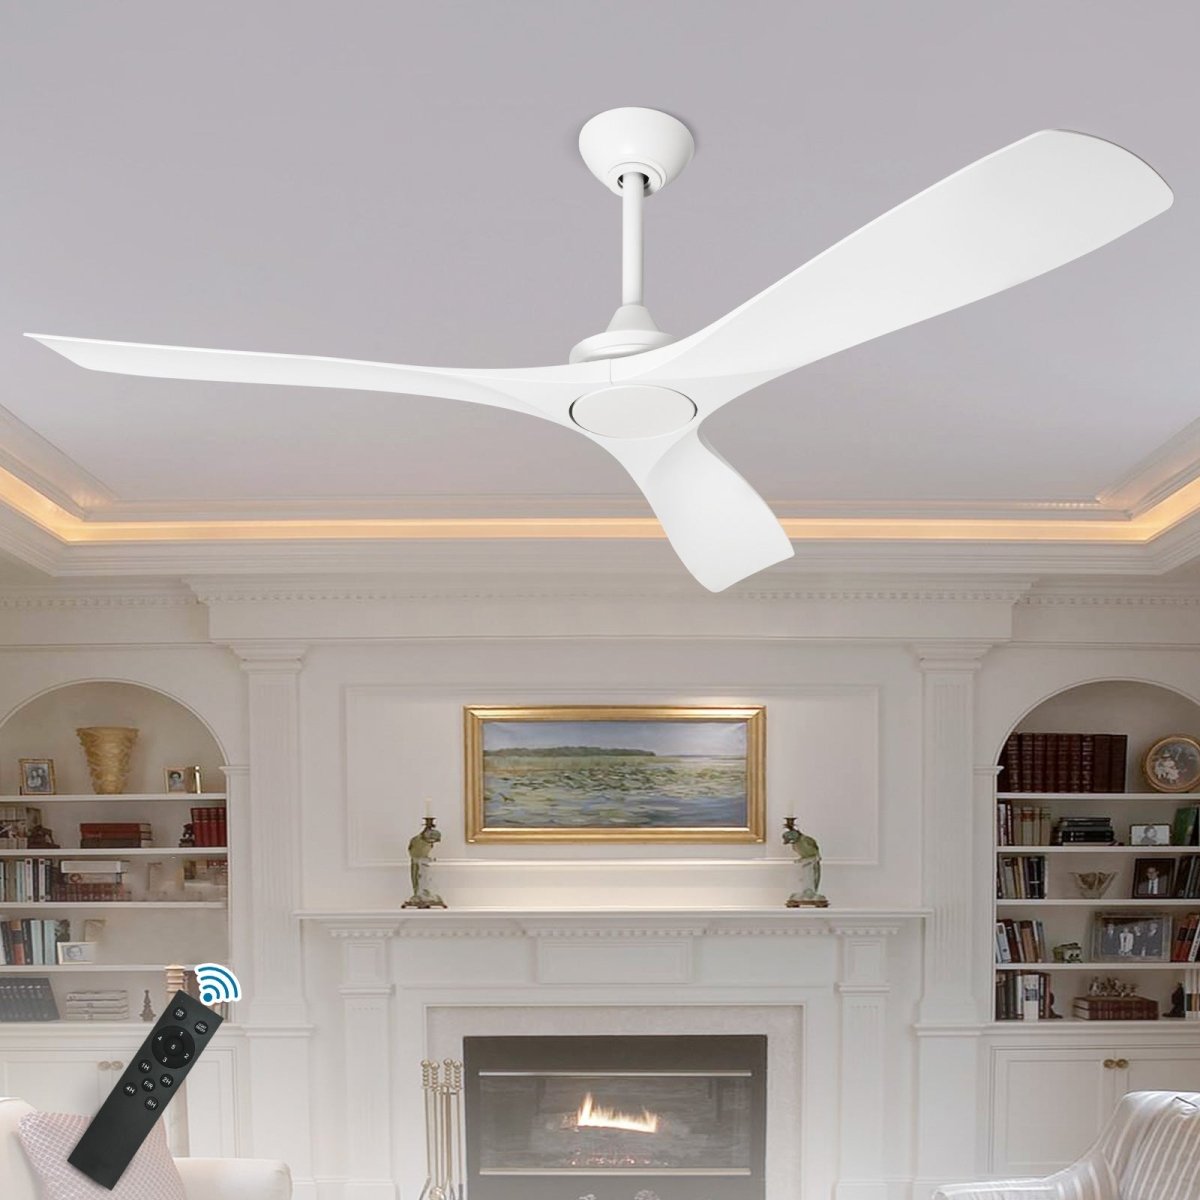 Depuley White Modern Remote Ceiling Fan No Light, Low Profile Ceiling Fans Without Light, 52-Inch Noiseless Reversible DC Motor for Kitchen/Patio/Farmhouse & Covered Outdoor, Timing - WS-FPZ42-18B-WH 1 | DEPULEY